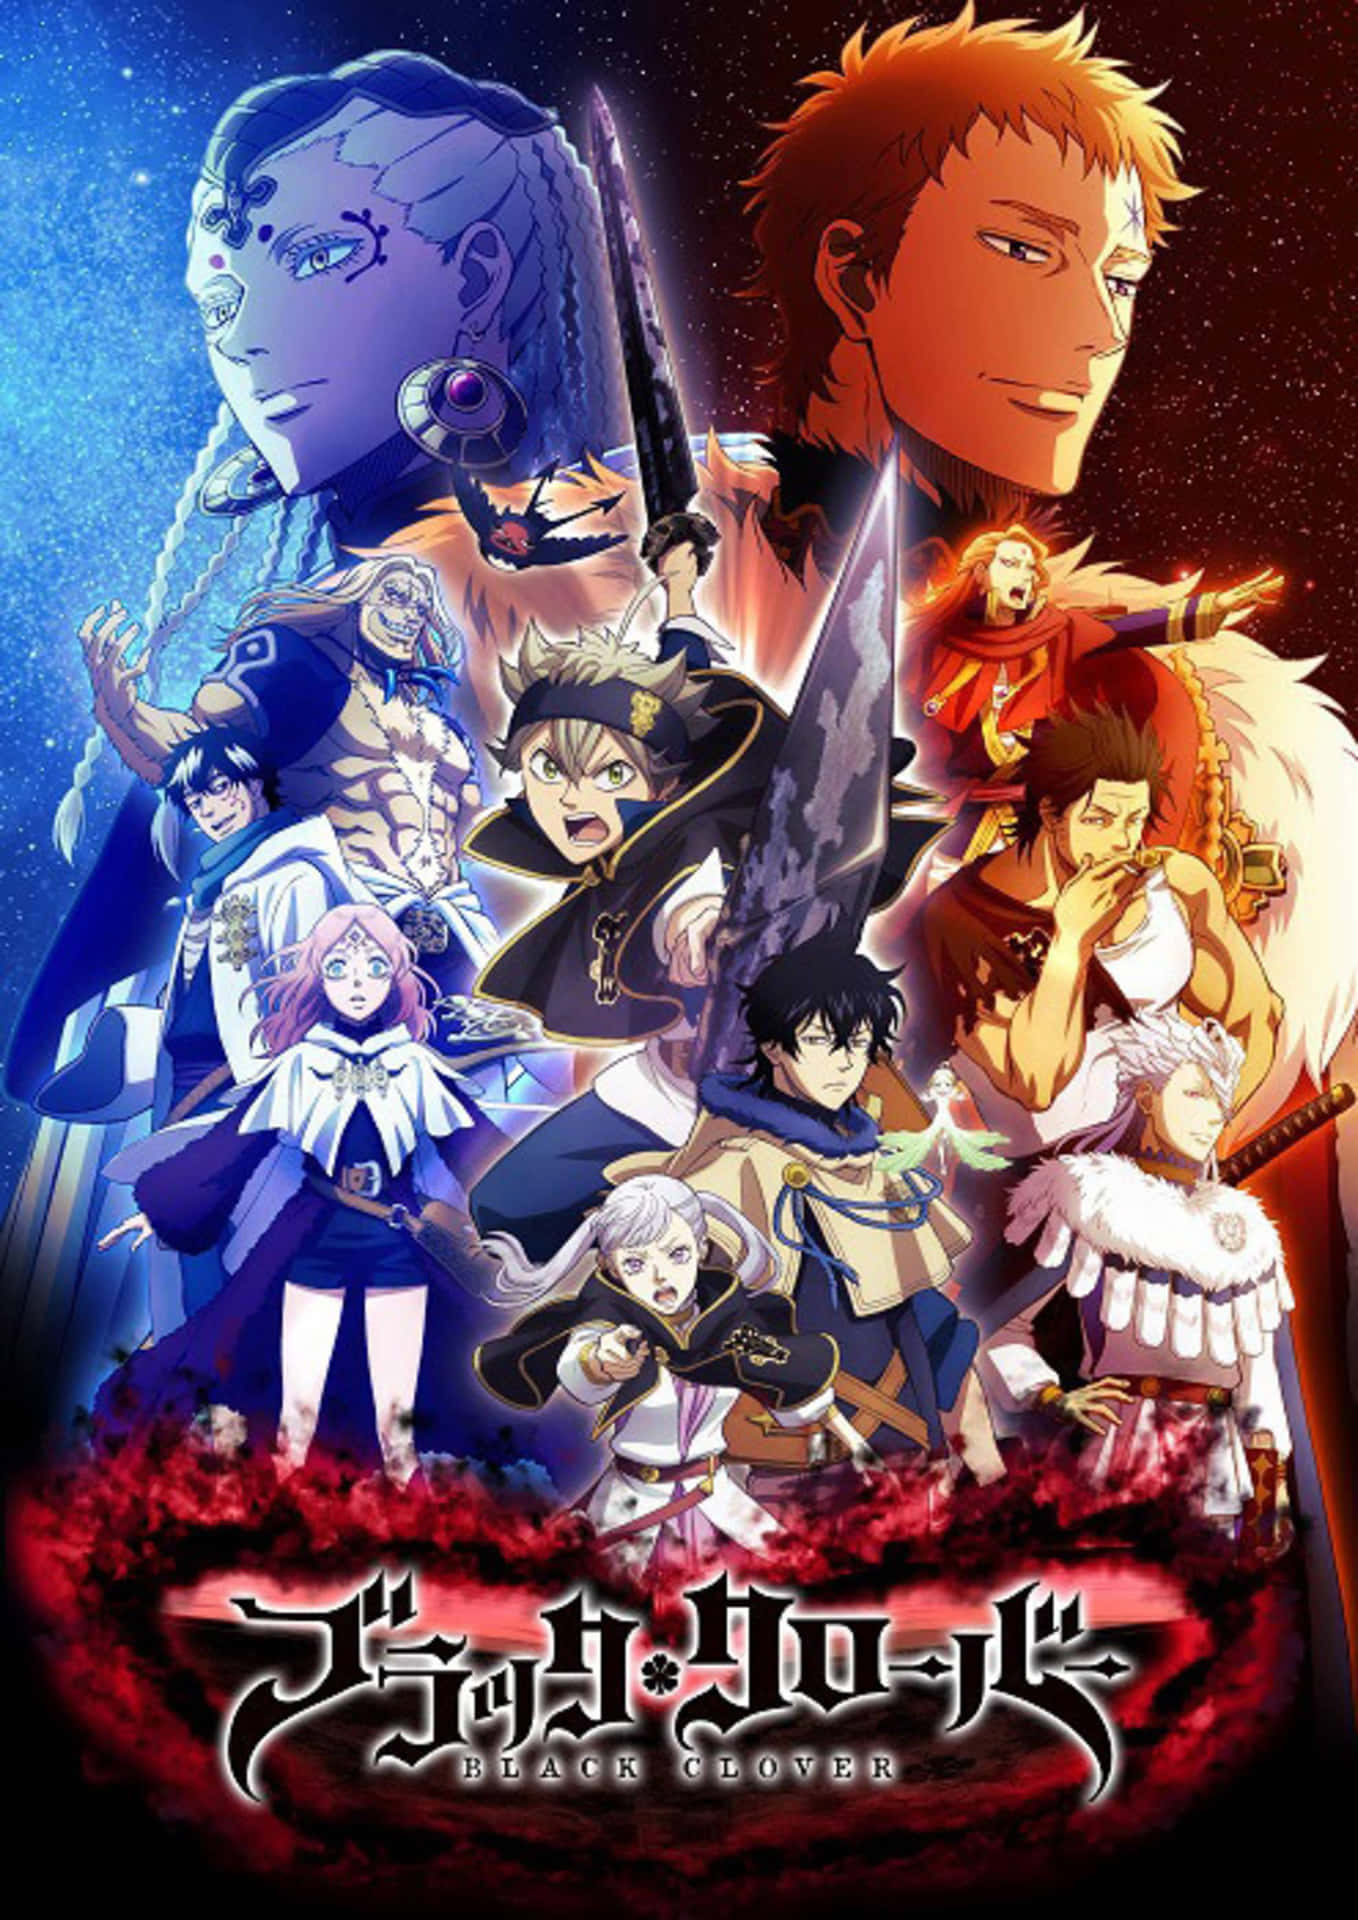 The Anime Poster For The Sword Of Fate Wallpaper